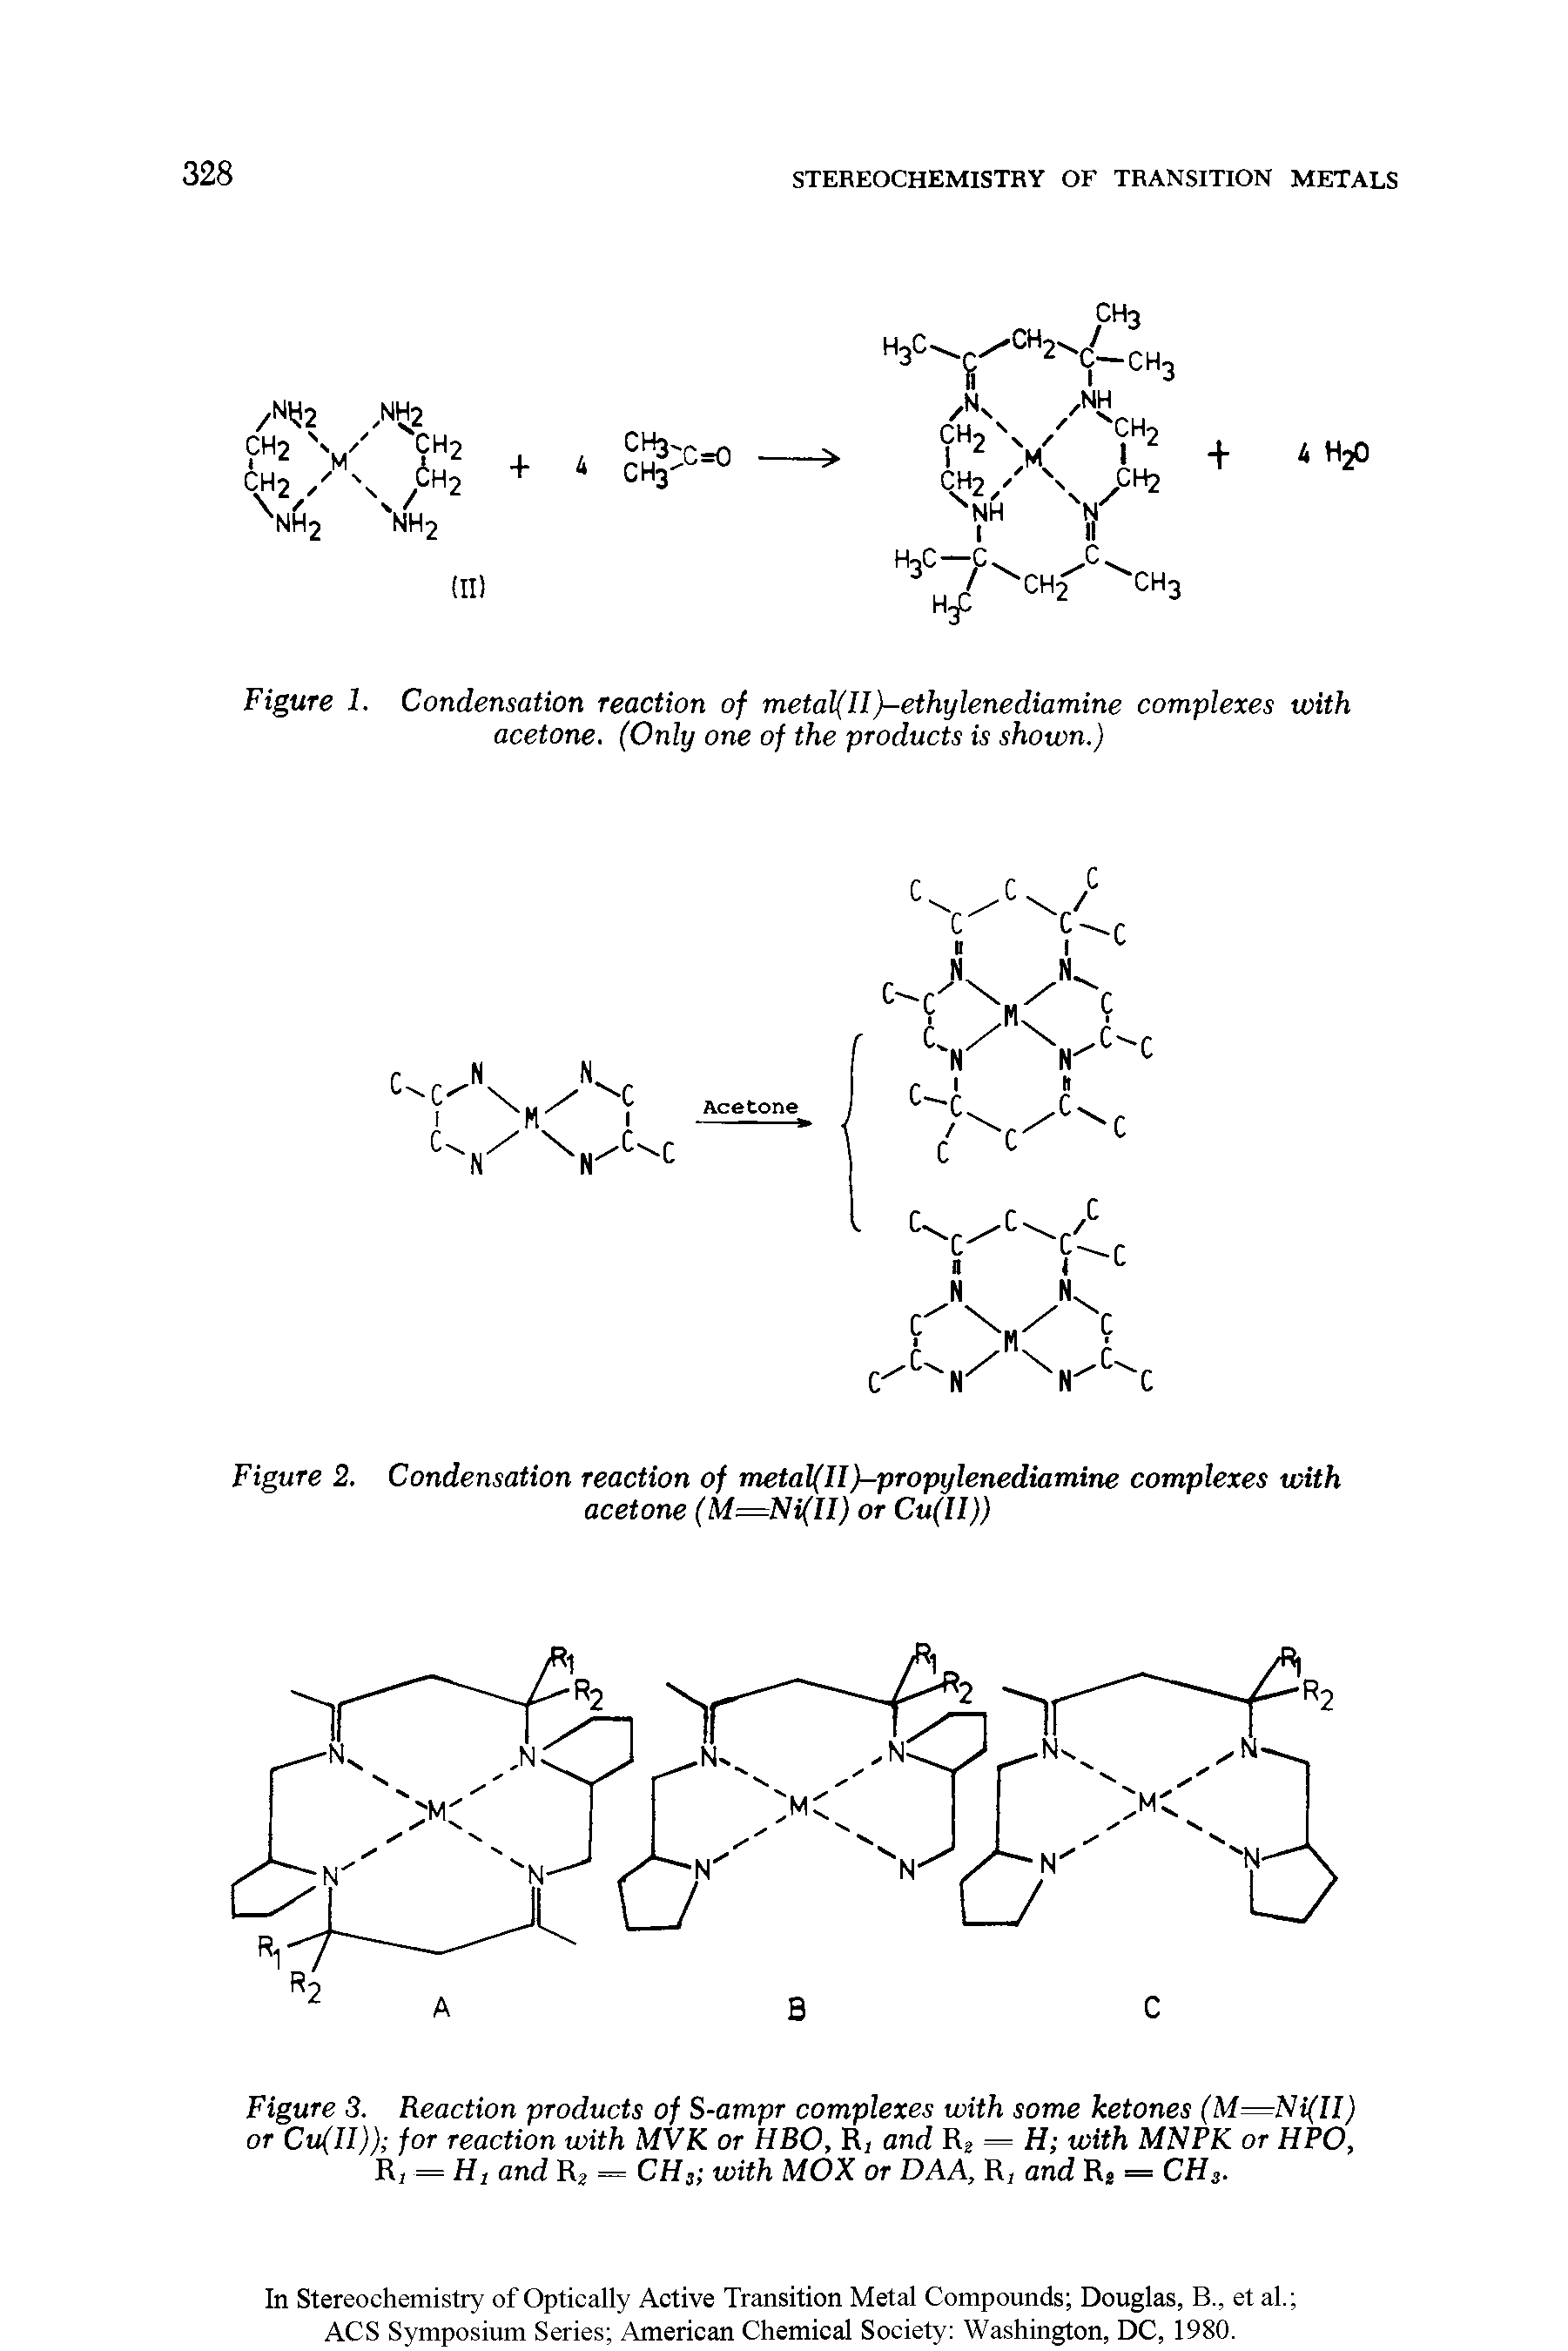 Figure 1. Condensation reaction of metal(n)-ethylenediamine complexes with acetone. (Only one of the products is shown.)...